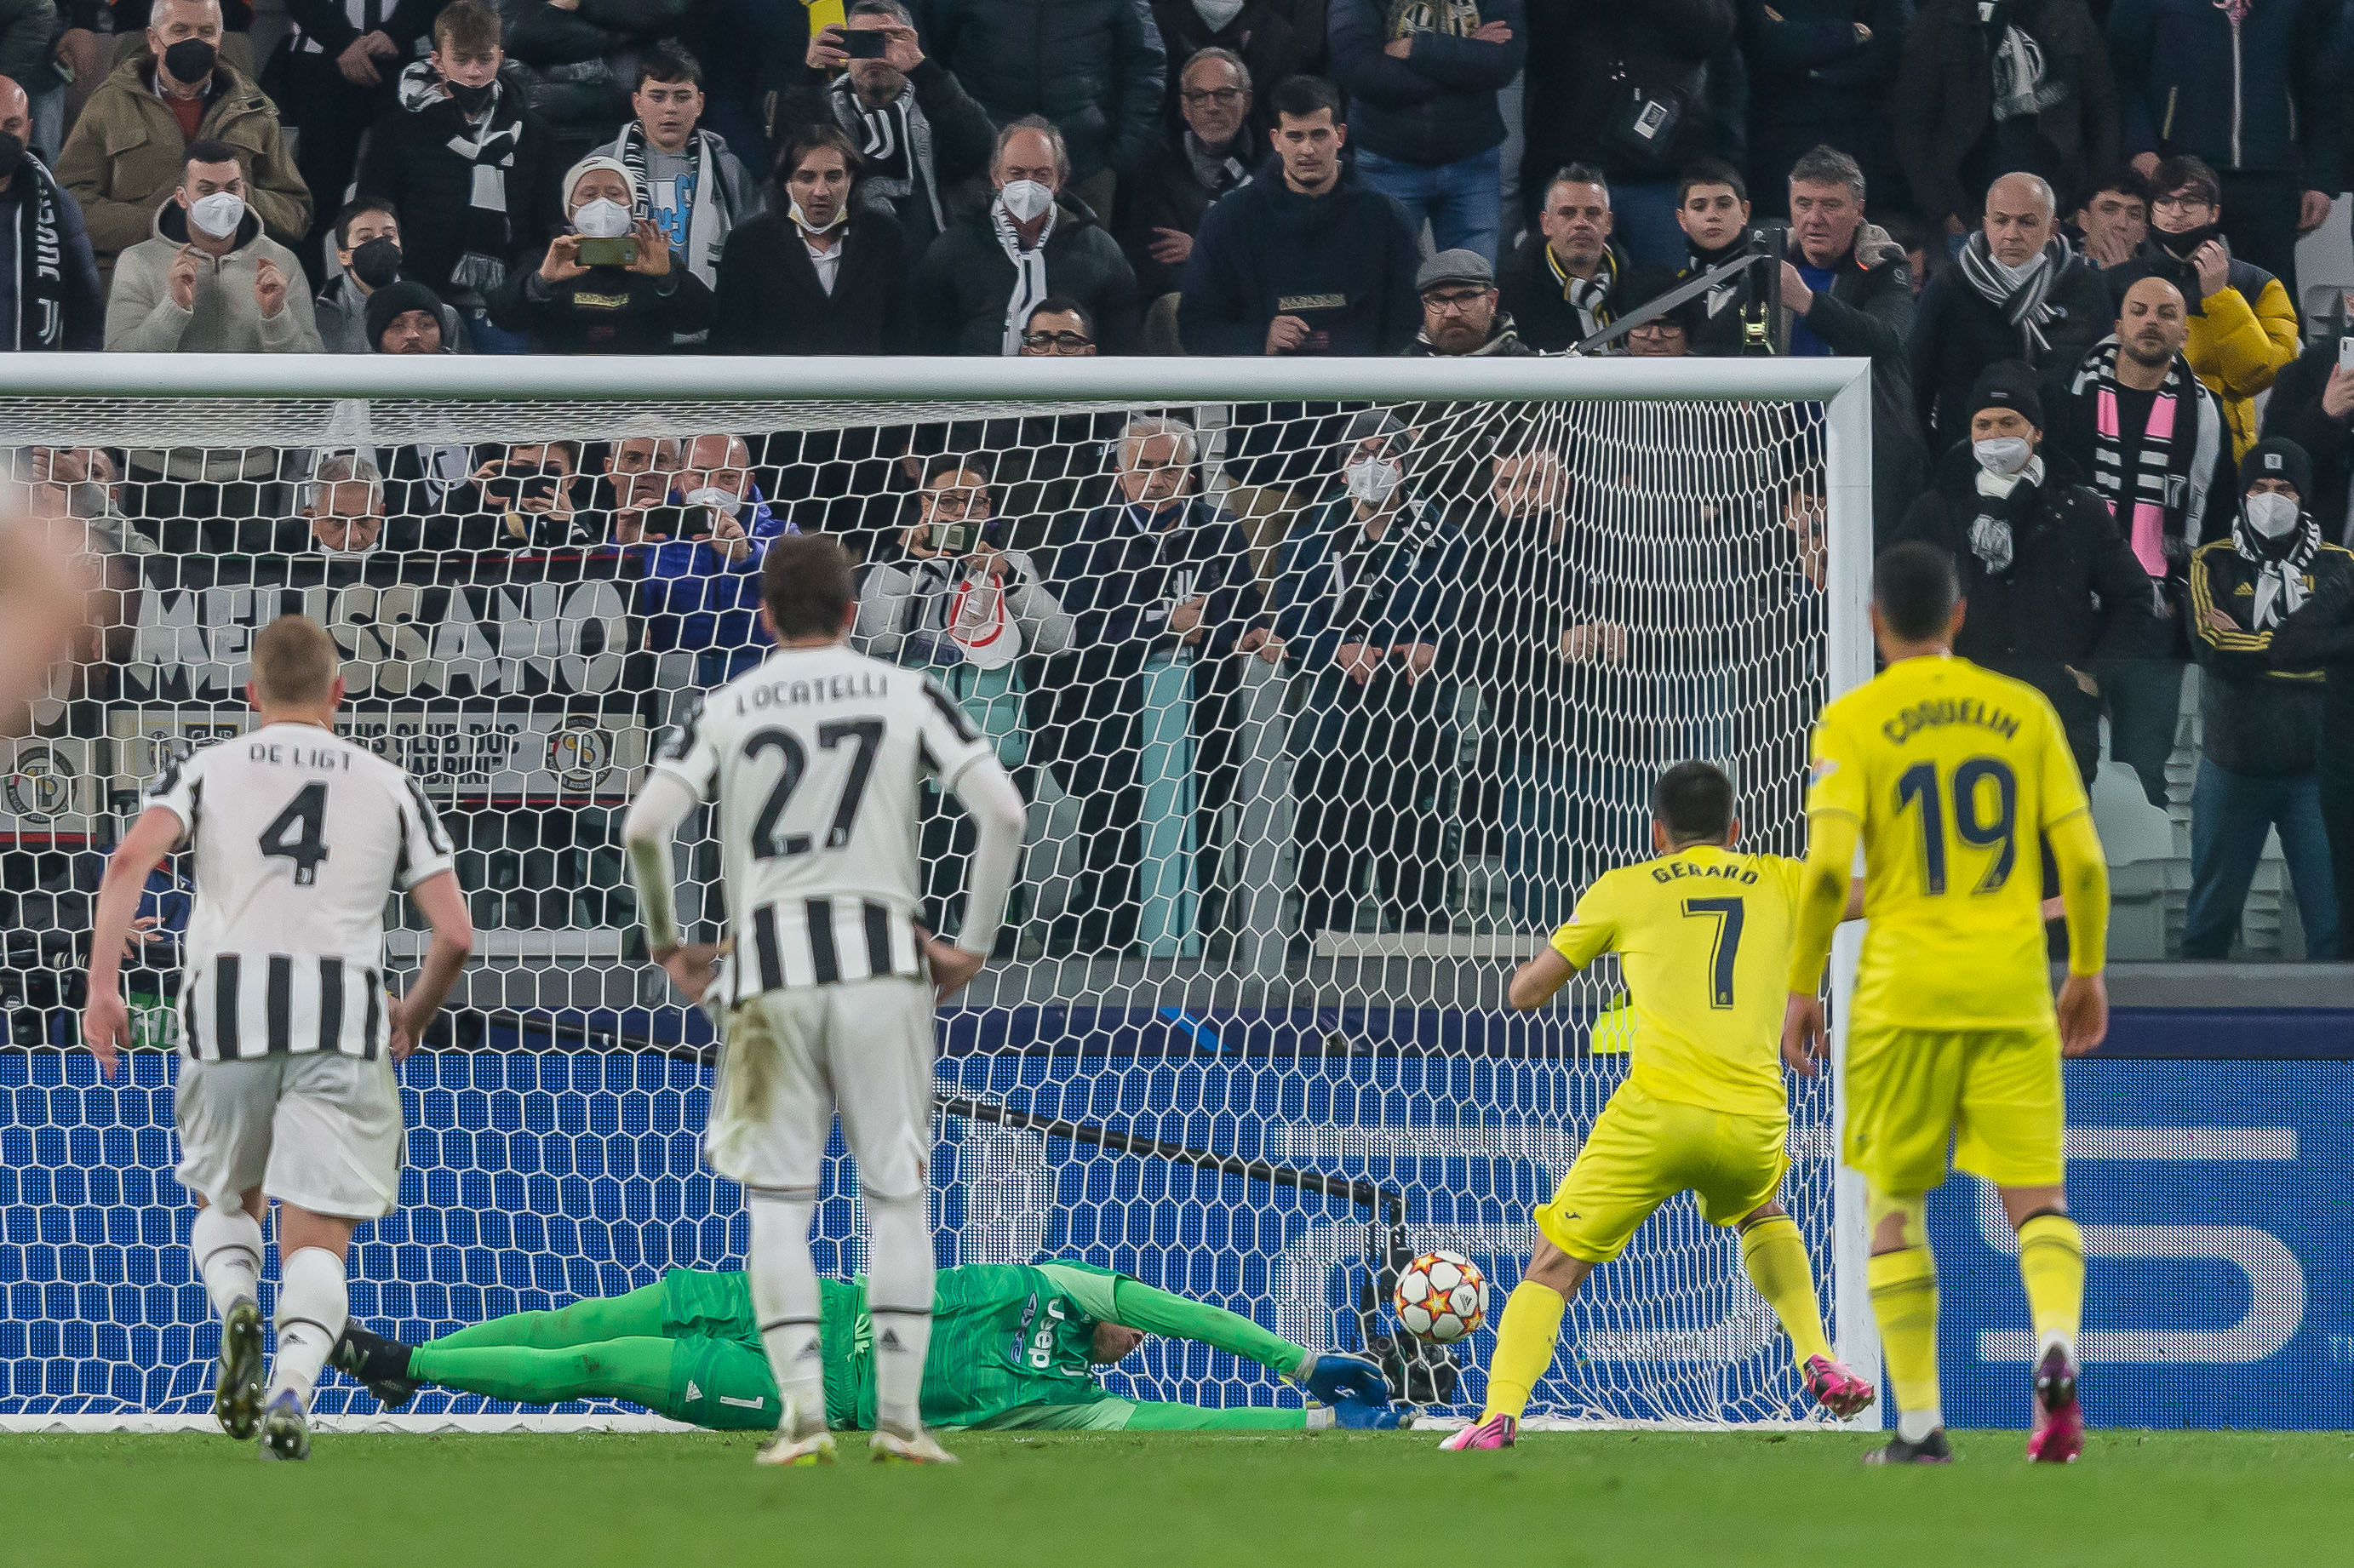 Juventus 0-3 Villarreal LIVE: Juventus are DUMPED OUT of the Champions League Last 16 once again as Villarreal stun the Italians in a dominating victory